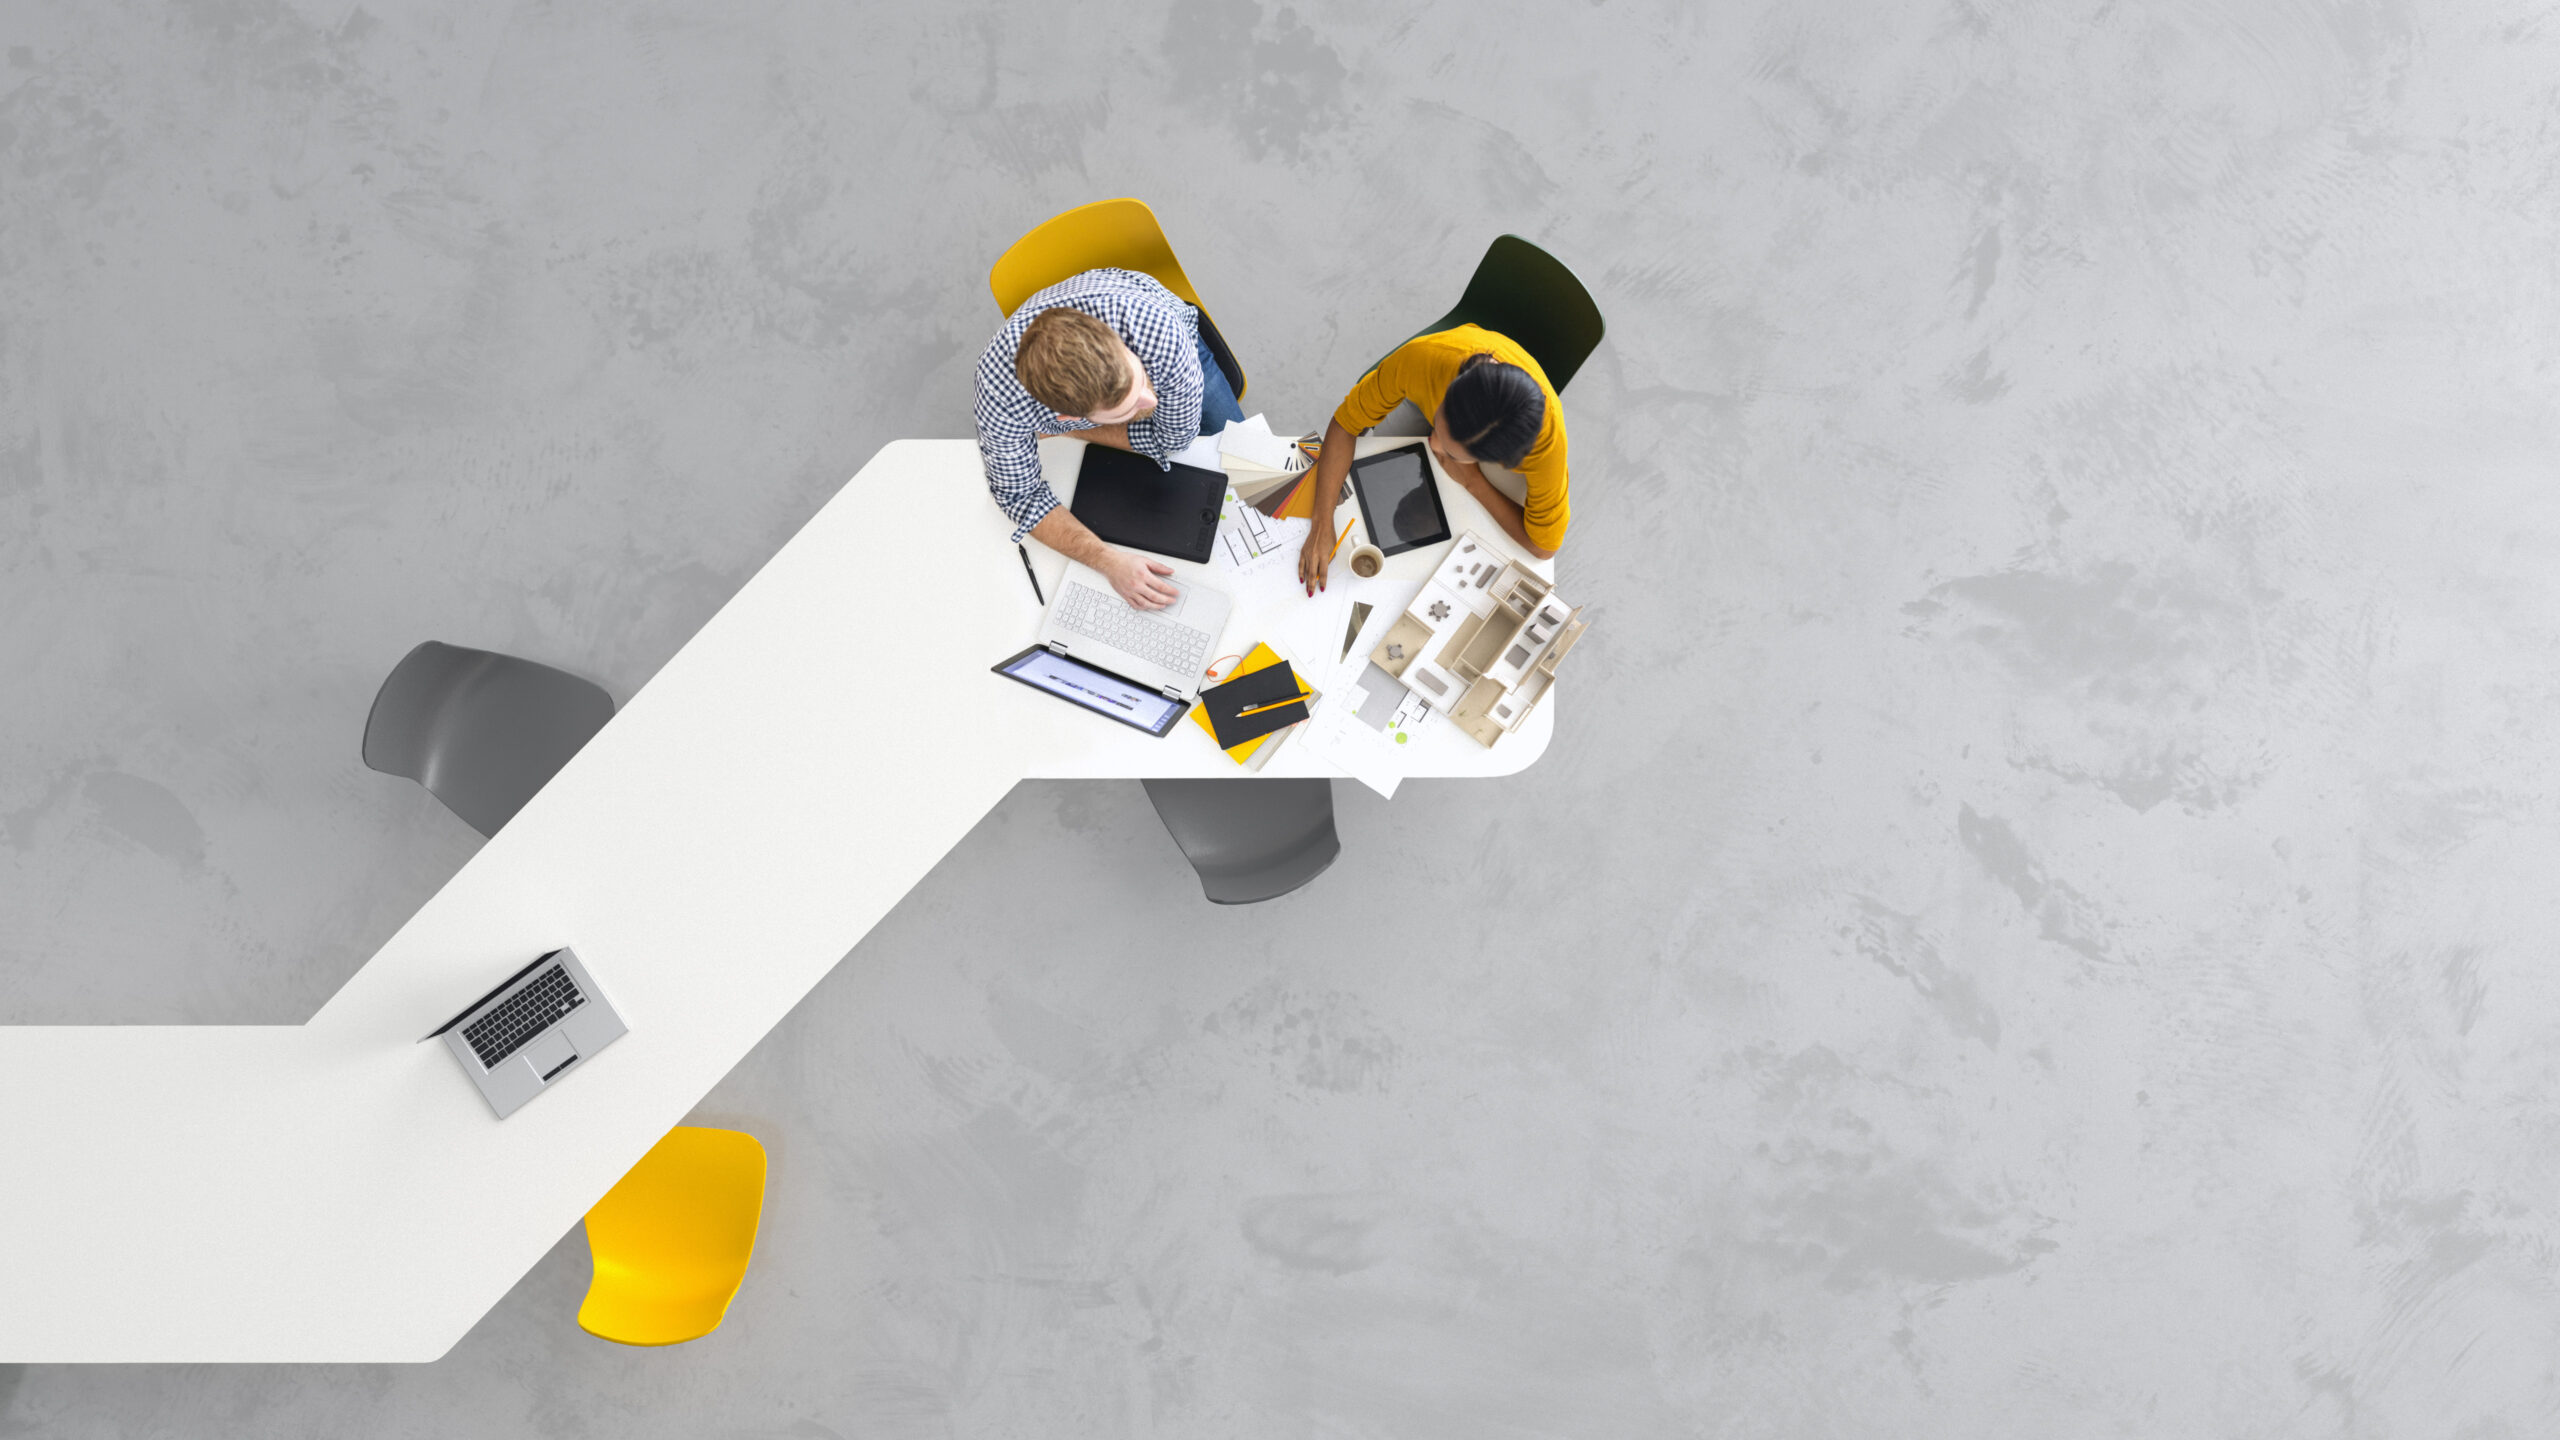 Overhead view of minimalistic office environment with two people collaborating.